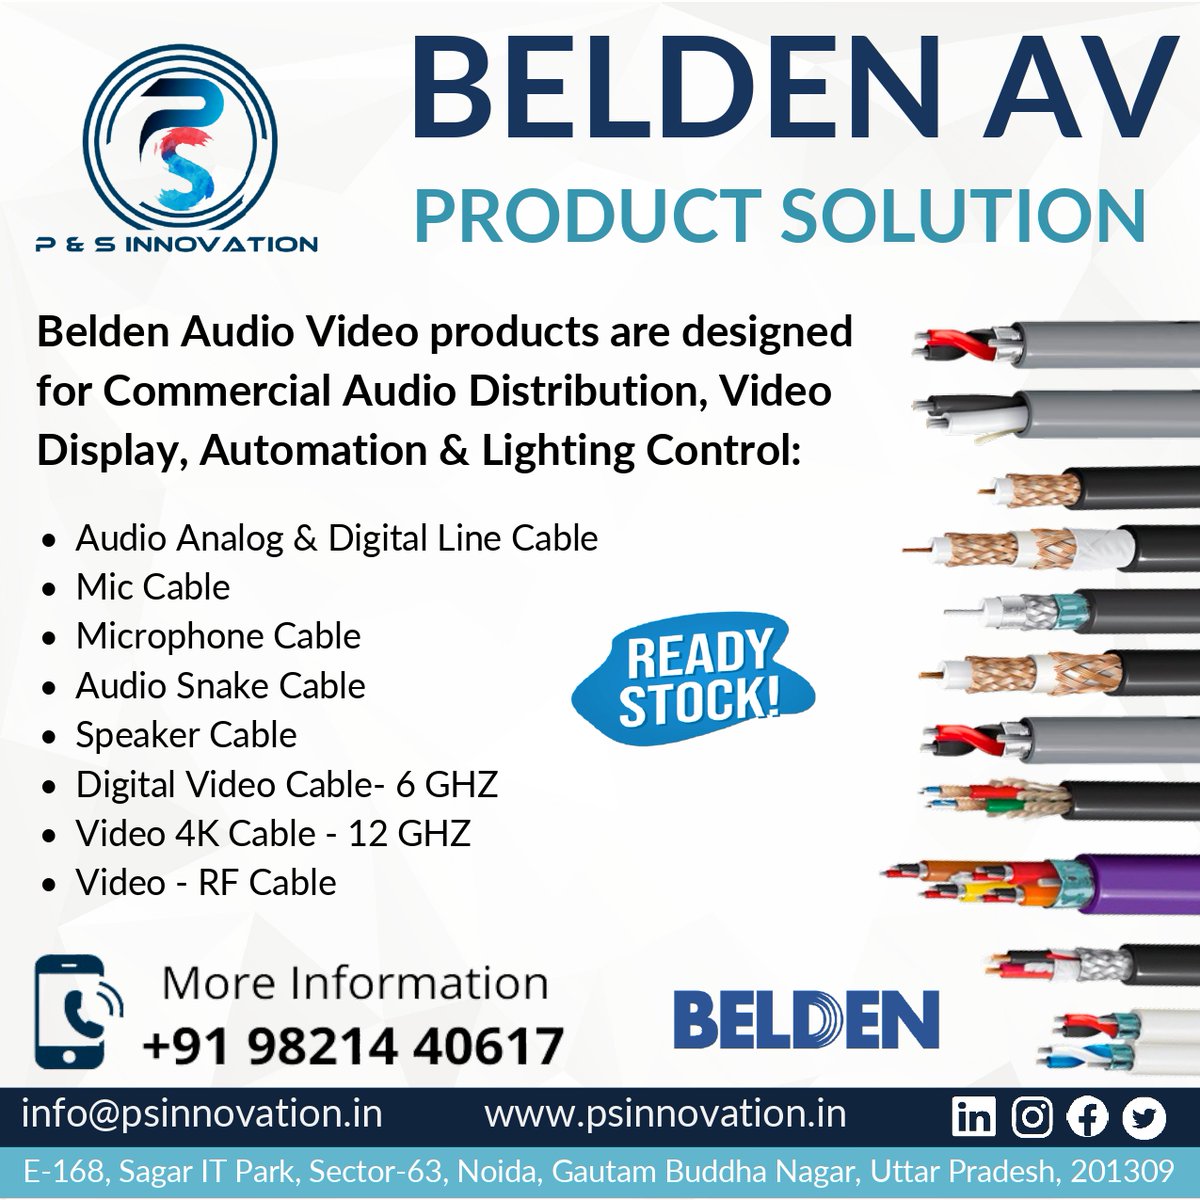 For More Information WhatsApp us on
wa.me/919821440617

#pandsinnovation #belden #cables  #industrialcables #industrialautomation #products #networkcables  #beldencables #audiovideocables #videocales #audiocables #speakercable #microphonecable #miccable #beldenaudiovideo